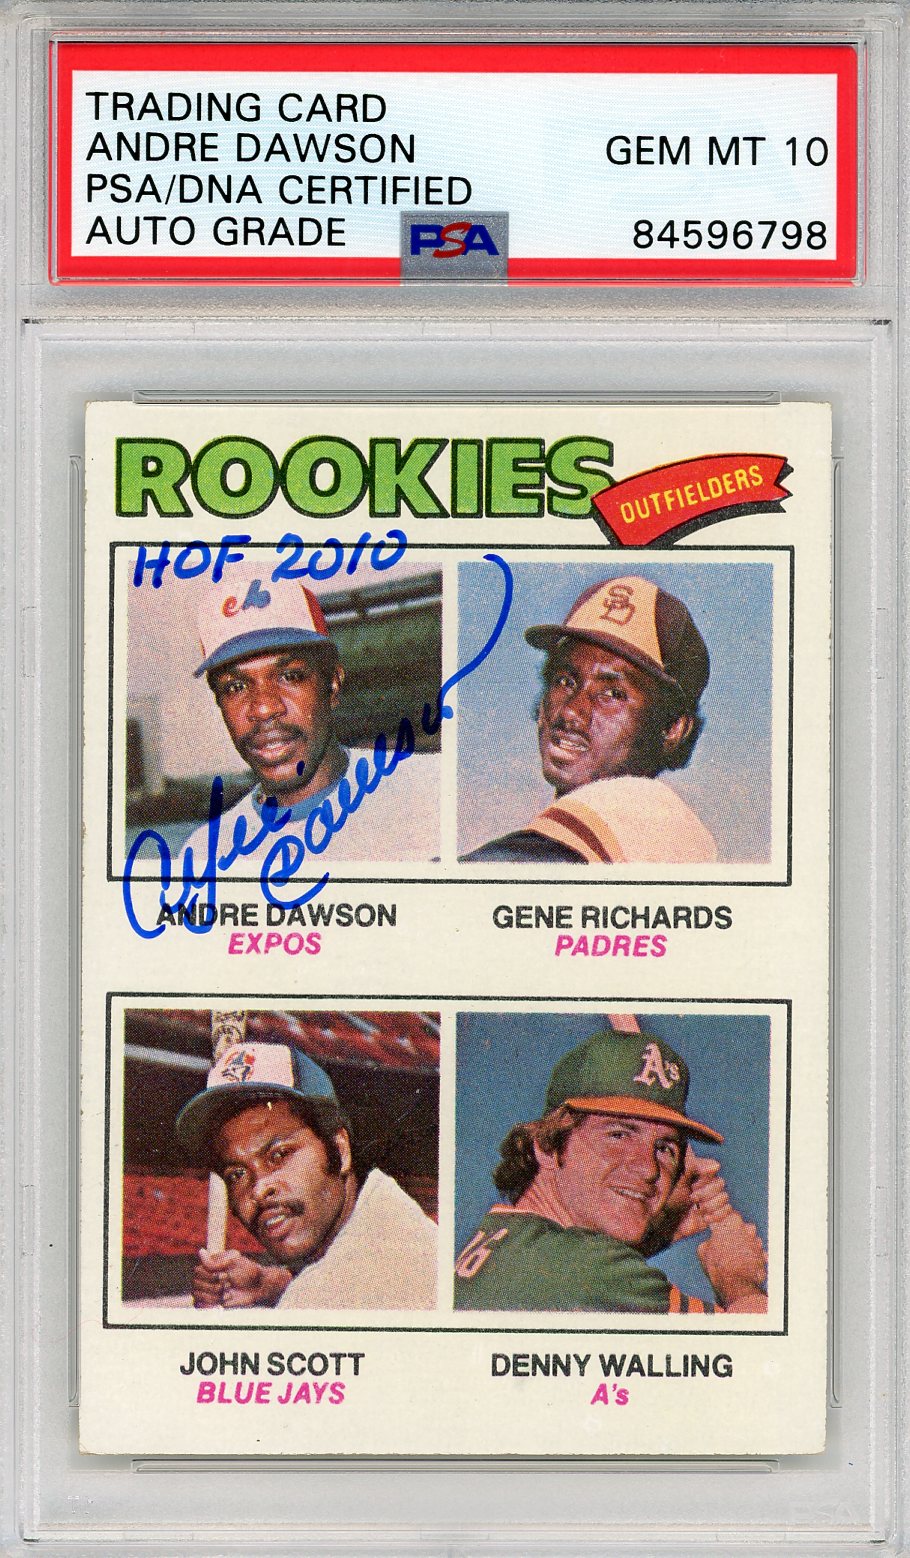 Andre Dawson HOF 2010 Autographed 1977 Topps Rookie Card (PSA Auto G